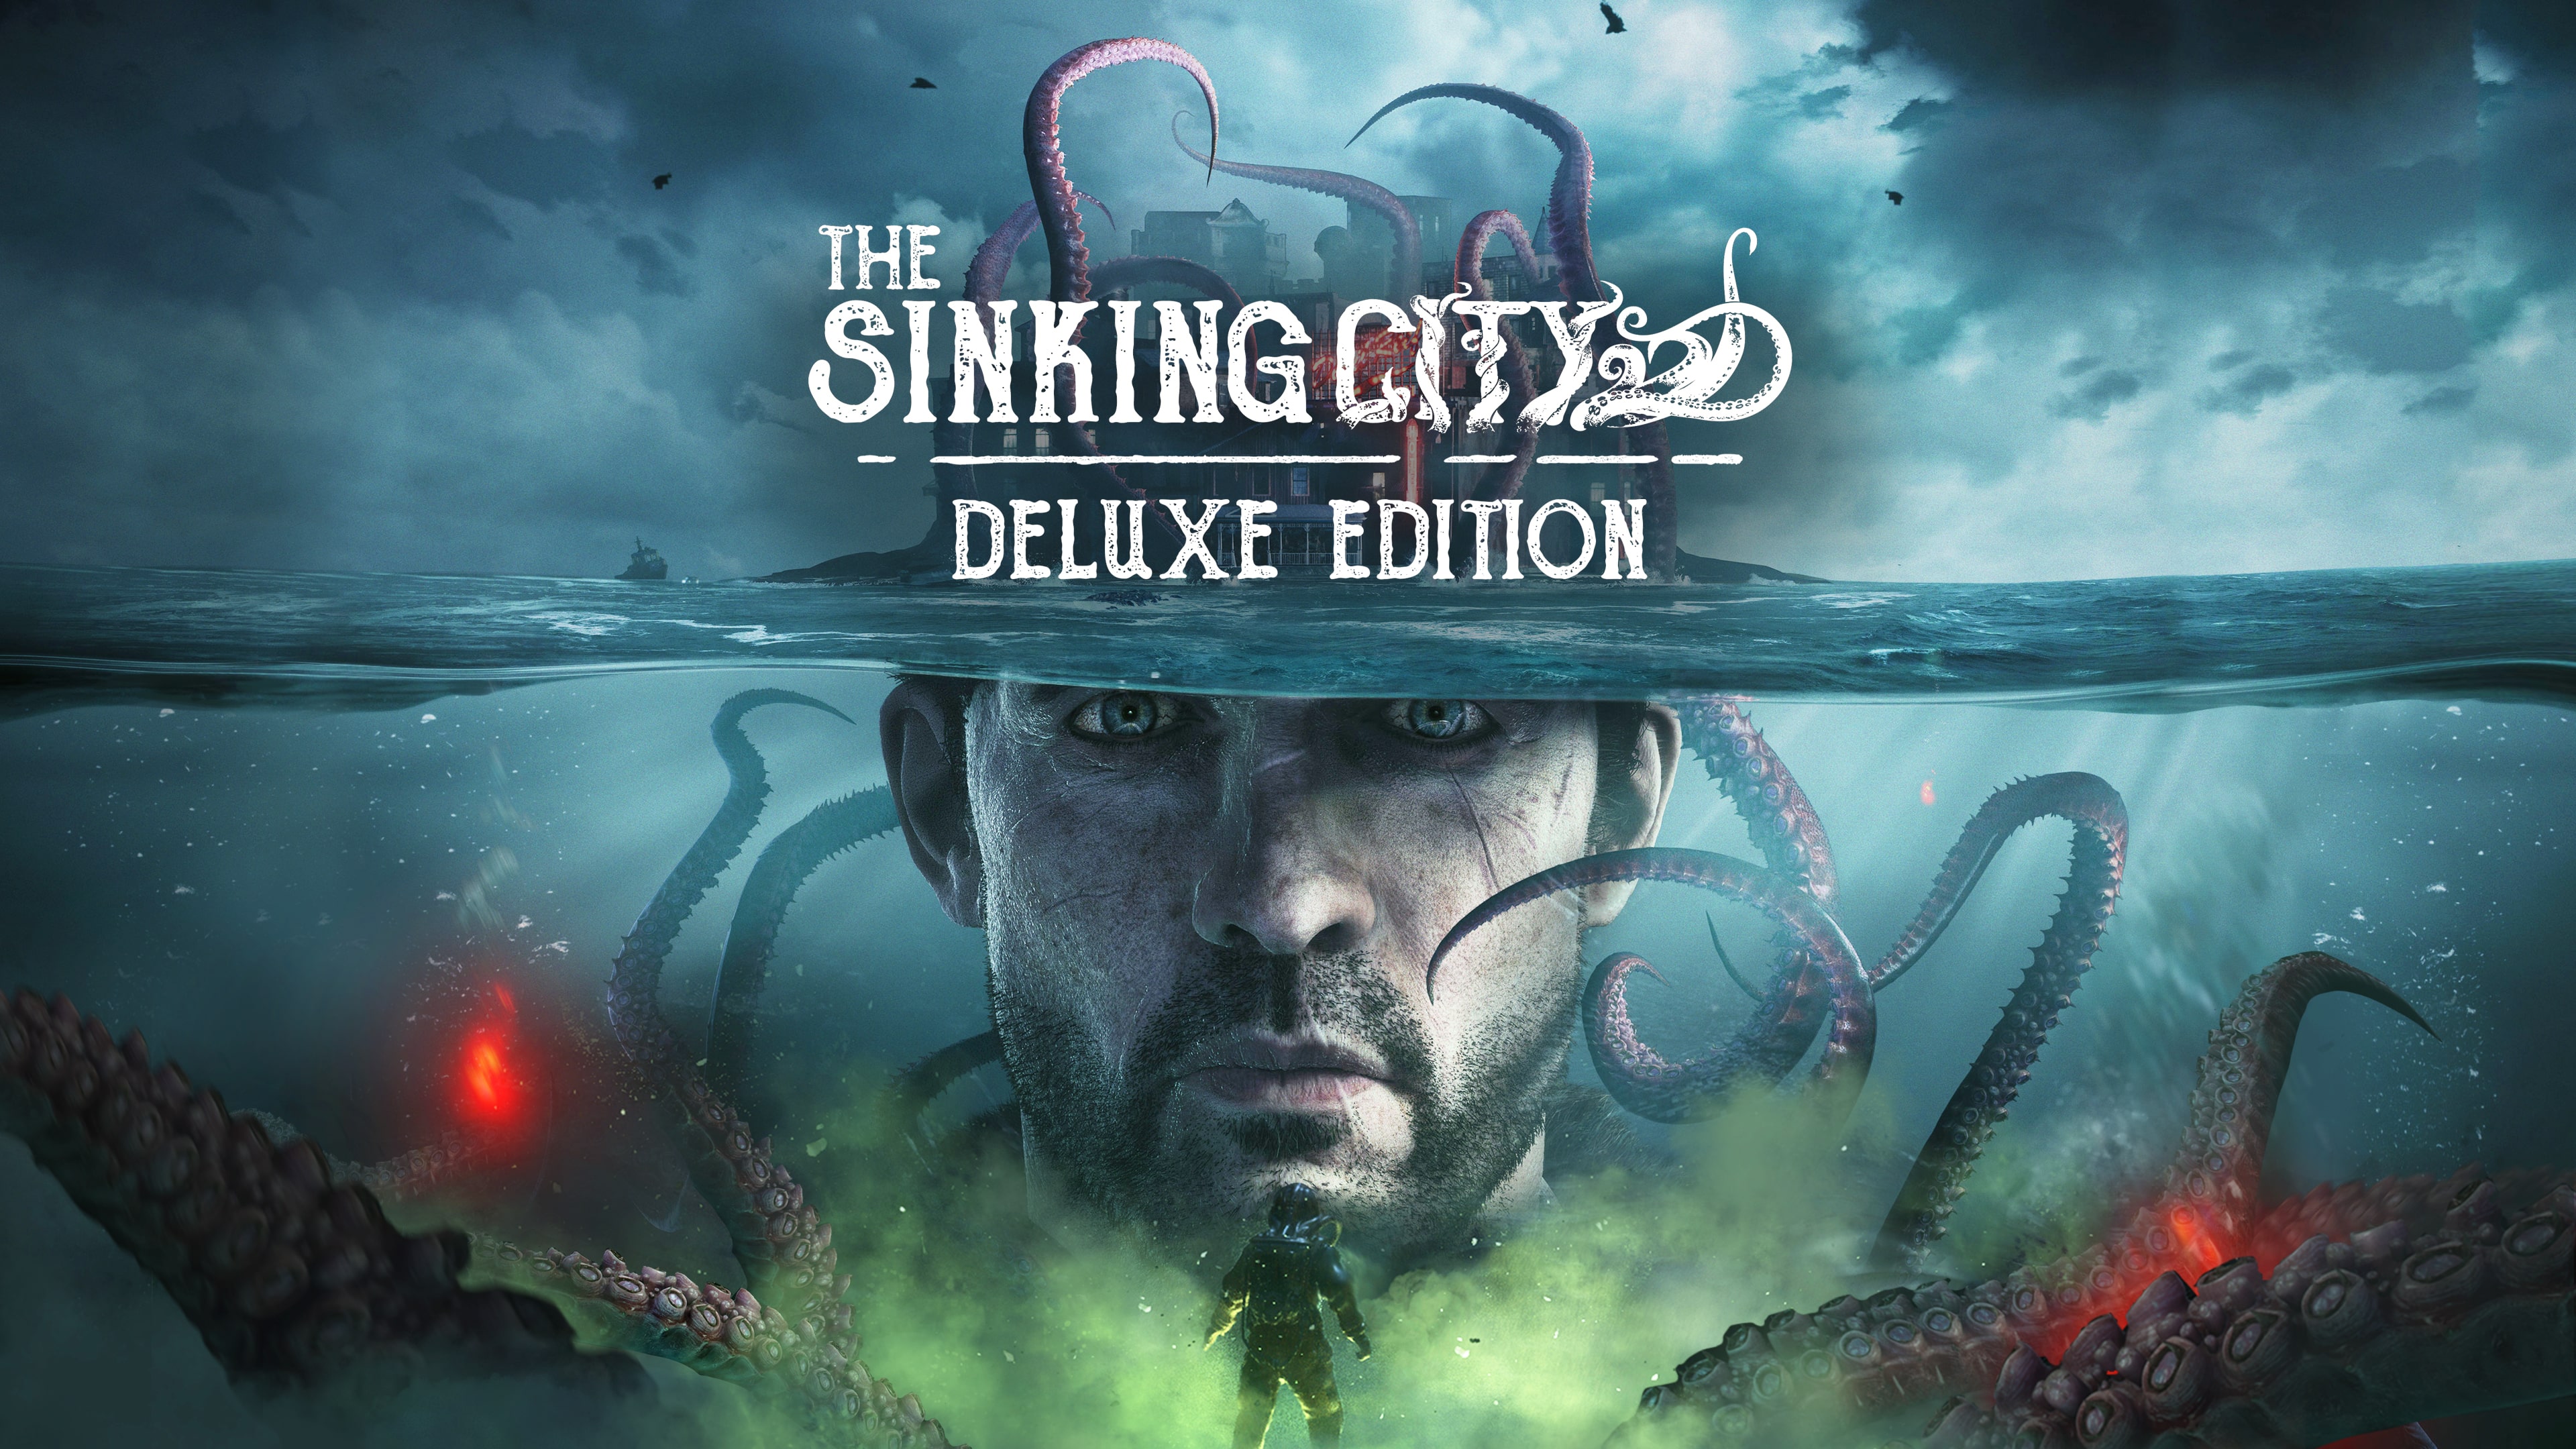 The sinking city купить. The Sinking City (ps4). The Sinking City DLC. The Sinking City. Lies of p: Deluxe Edition.